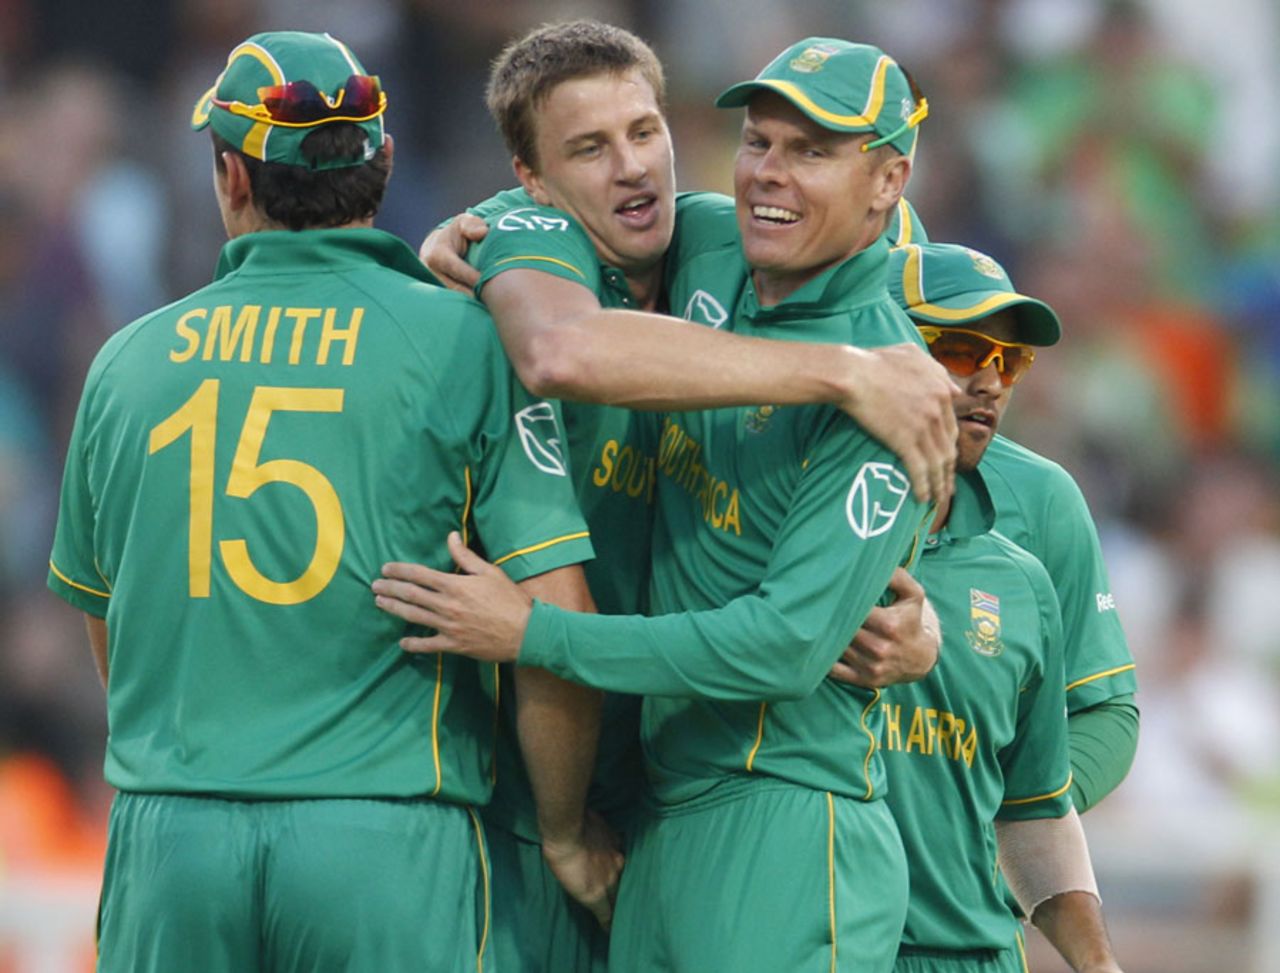 Morne Morkel is congratulated on the wicket of Virat Kohli, South Africa v India, 3rd ODI, Cape Town, January 18, 2011